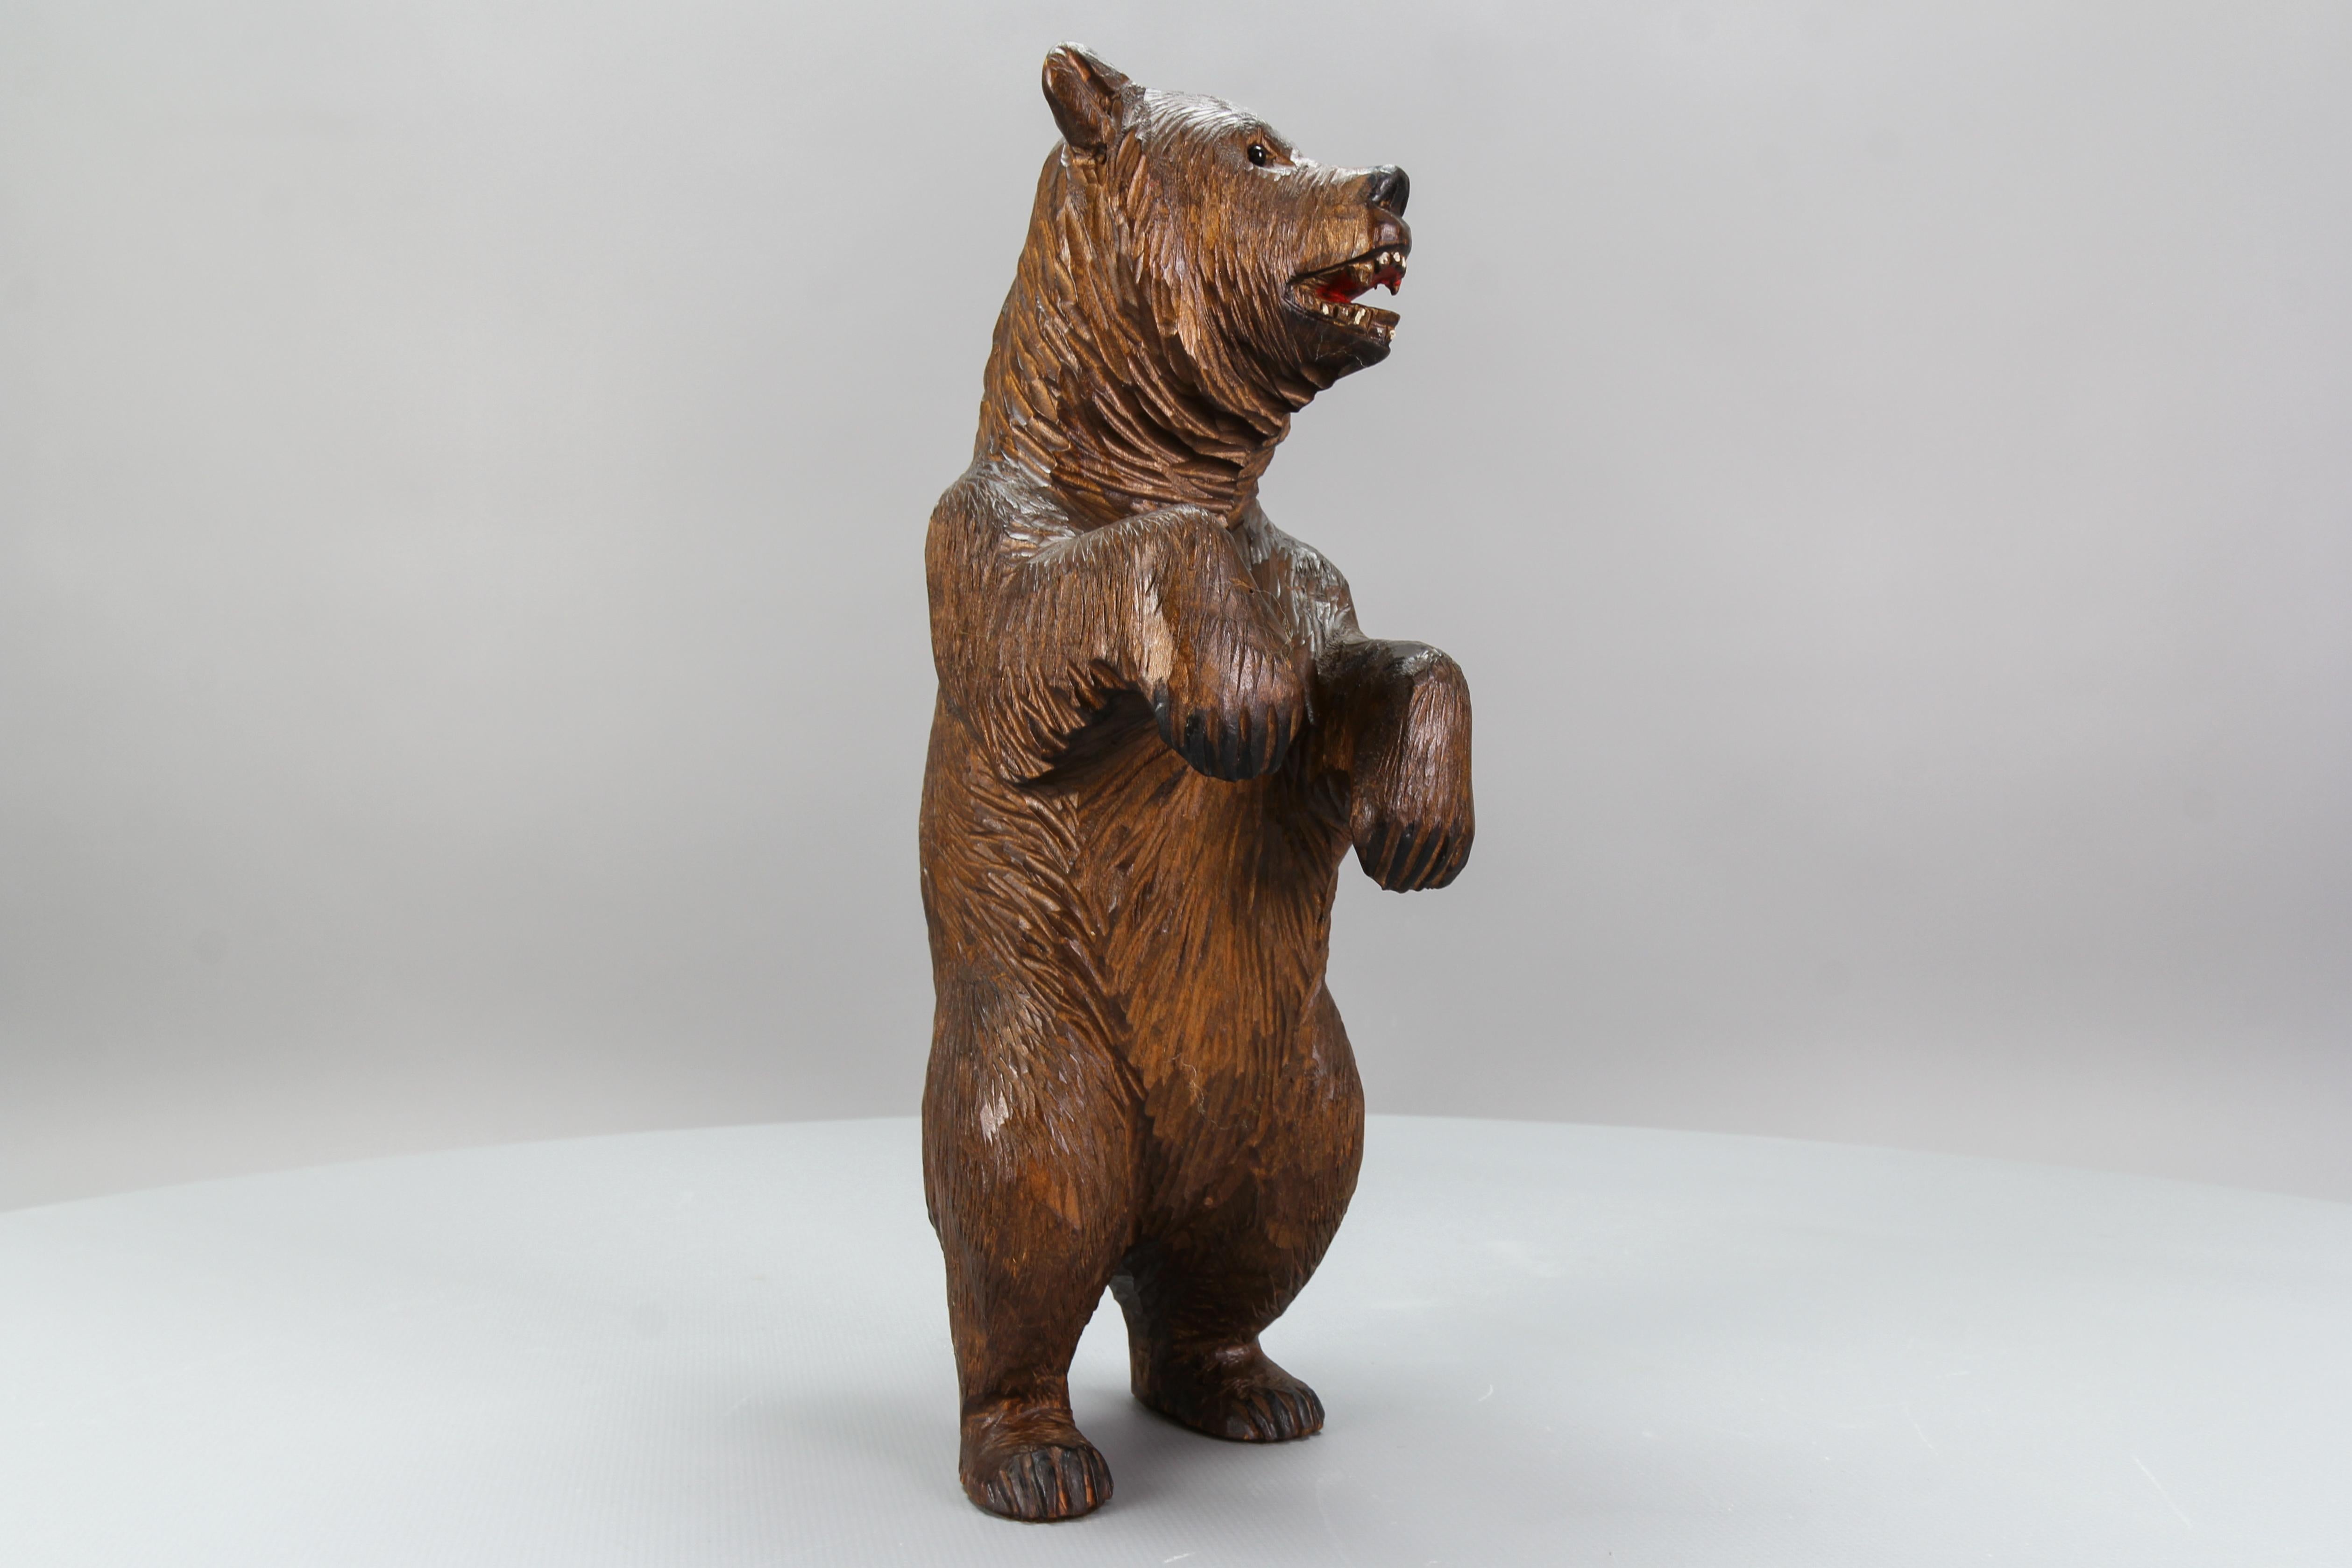 Antique hand carved standing bear sculpture.
A beautiful and masterfully hand-carved walnut figure of a standing bear, with highly detailed features and fur. Germany, circa 1920.
Dimensions, approx.: height: 29 cm / 11.41 in; width: 10 cm / 3.93